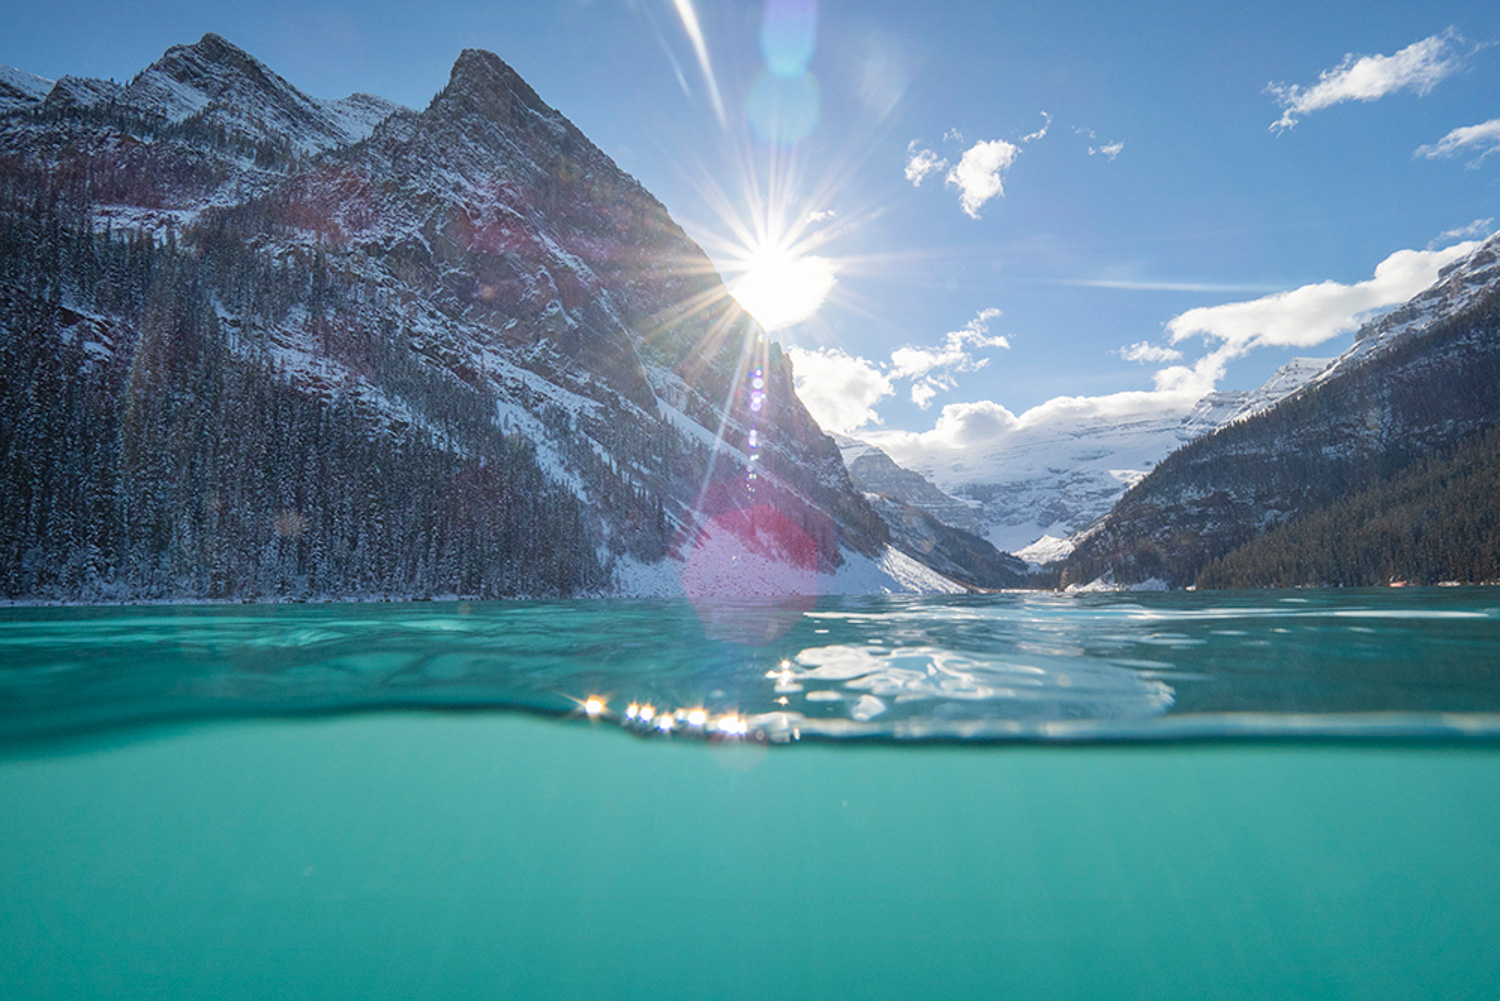 Photographing from a Canoe on Lake Louise, Canada